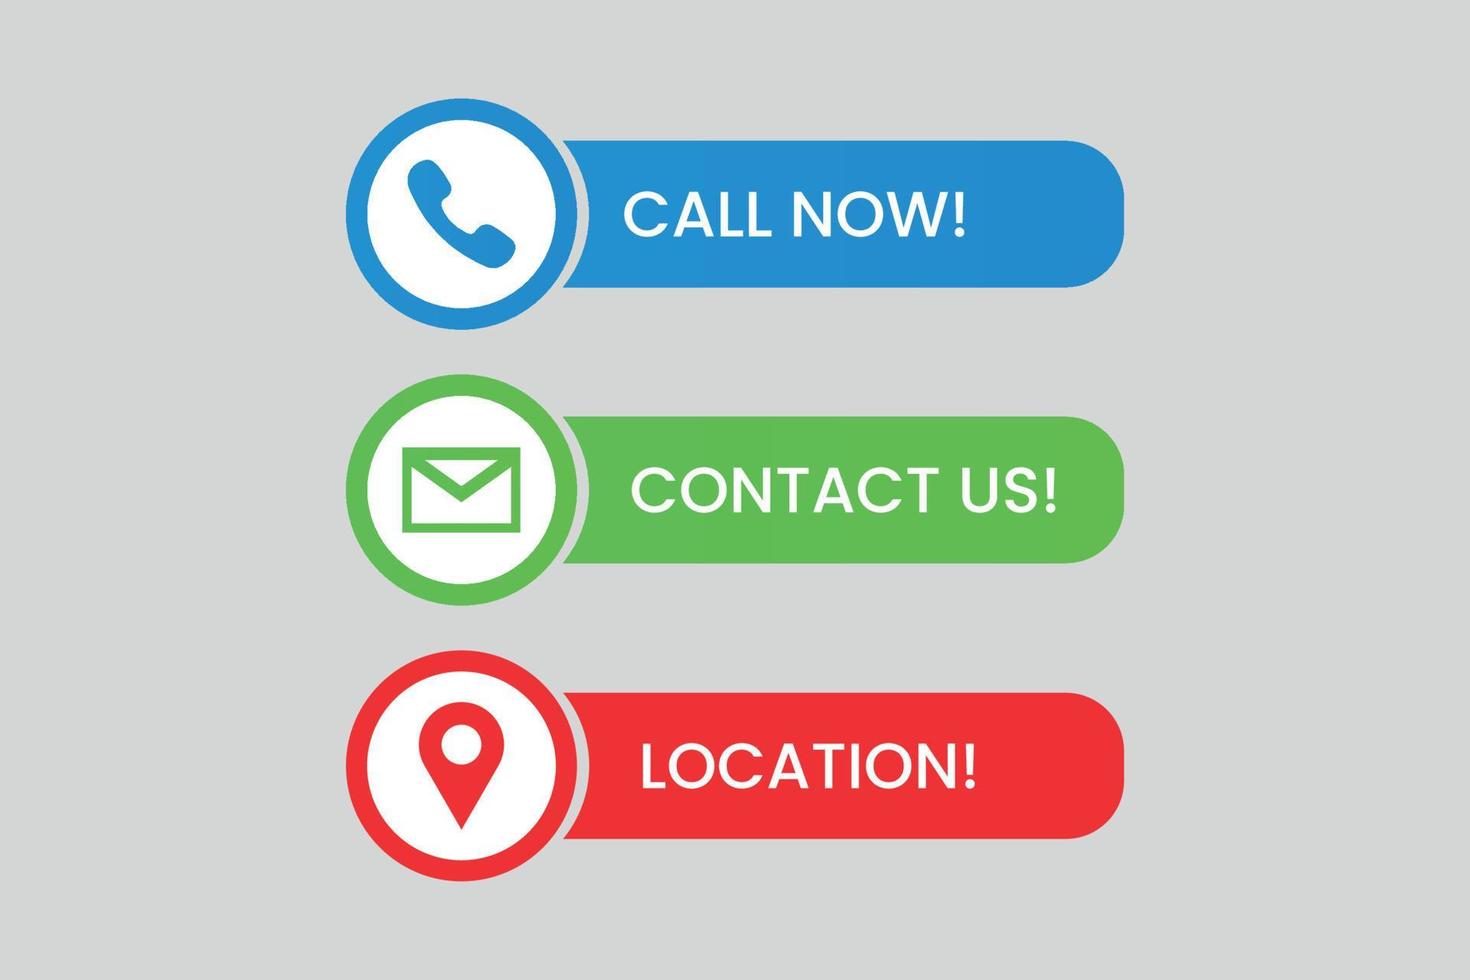 Contact us button with call now label banner and location icon chat sign in modern banners buttons vector